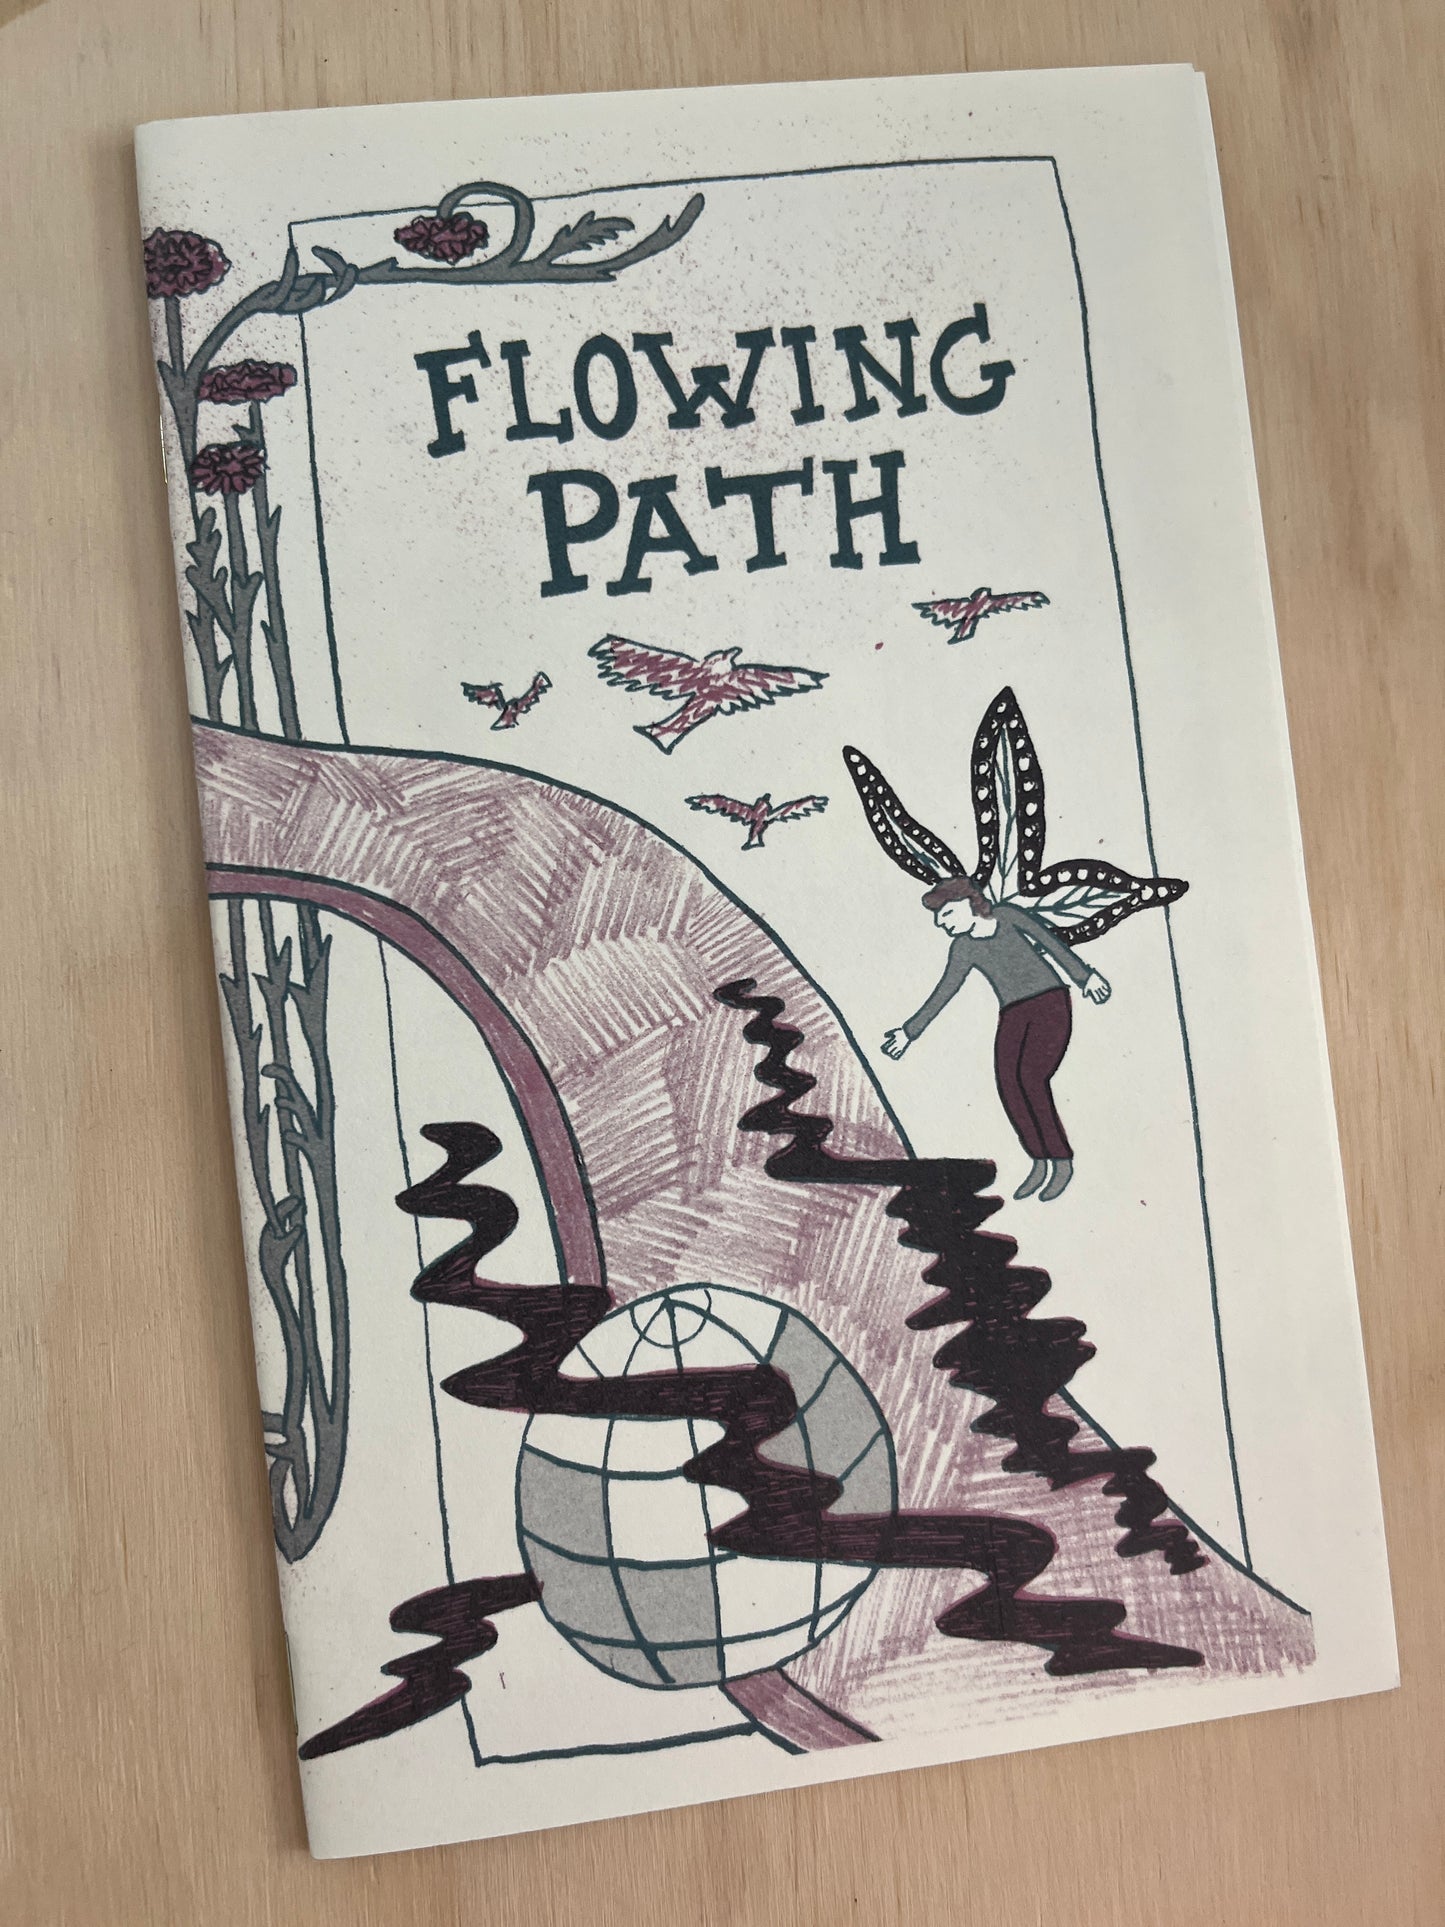 Flowing Path